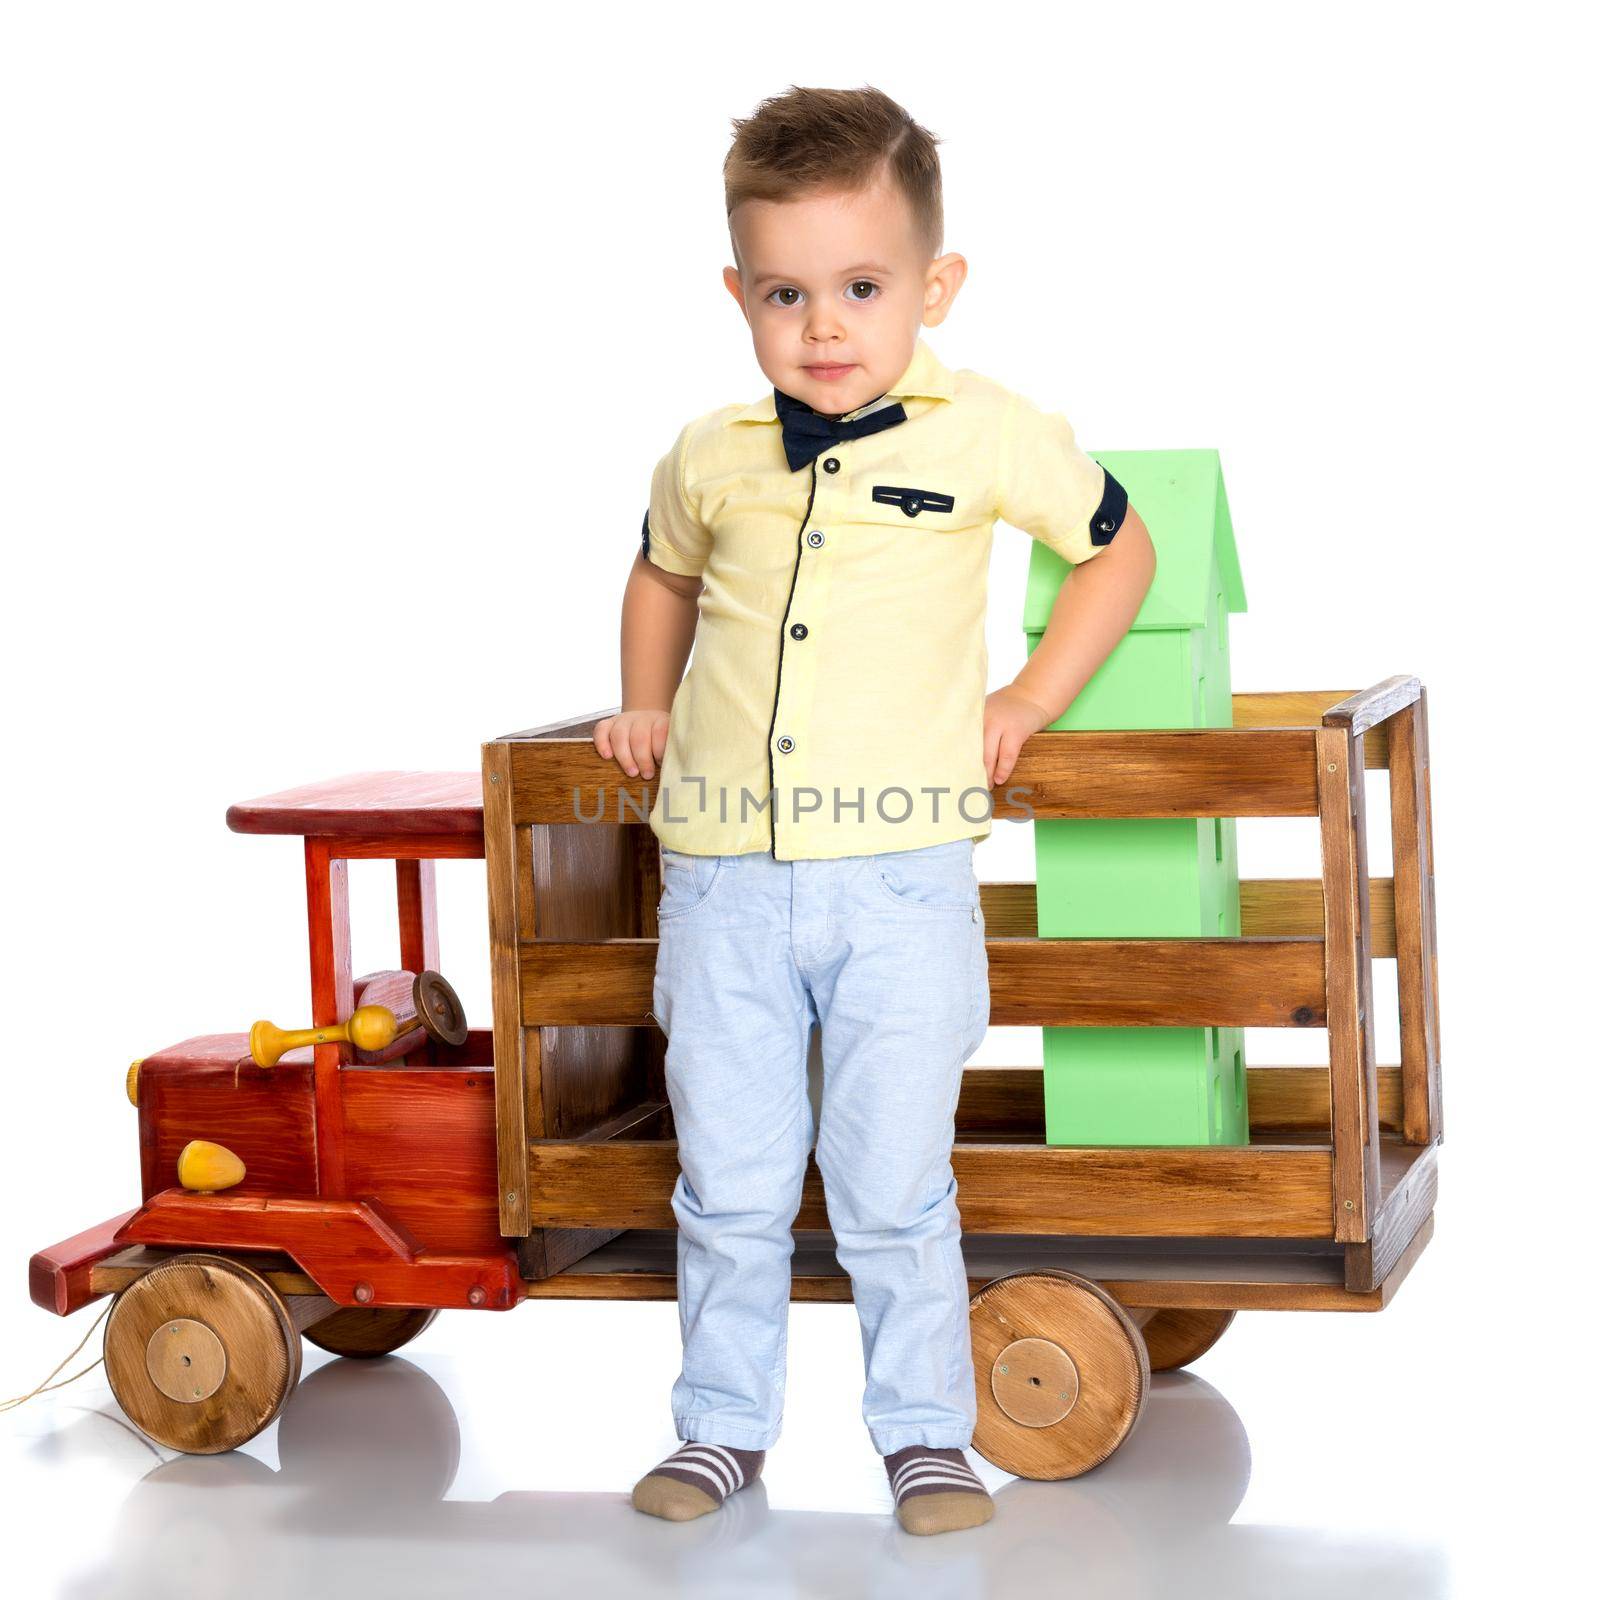 A little boy is playing with a toy car. by kolesnikov_studio